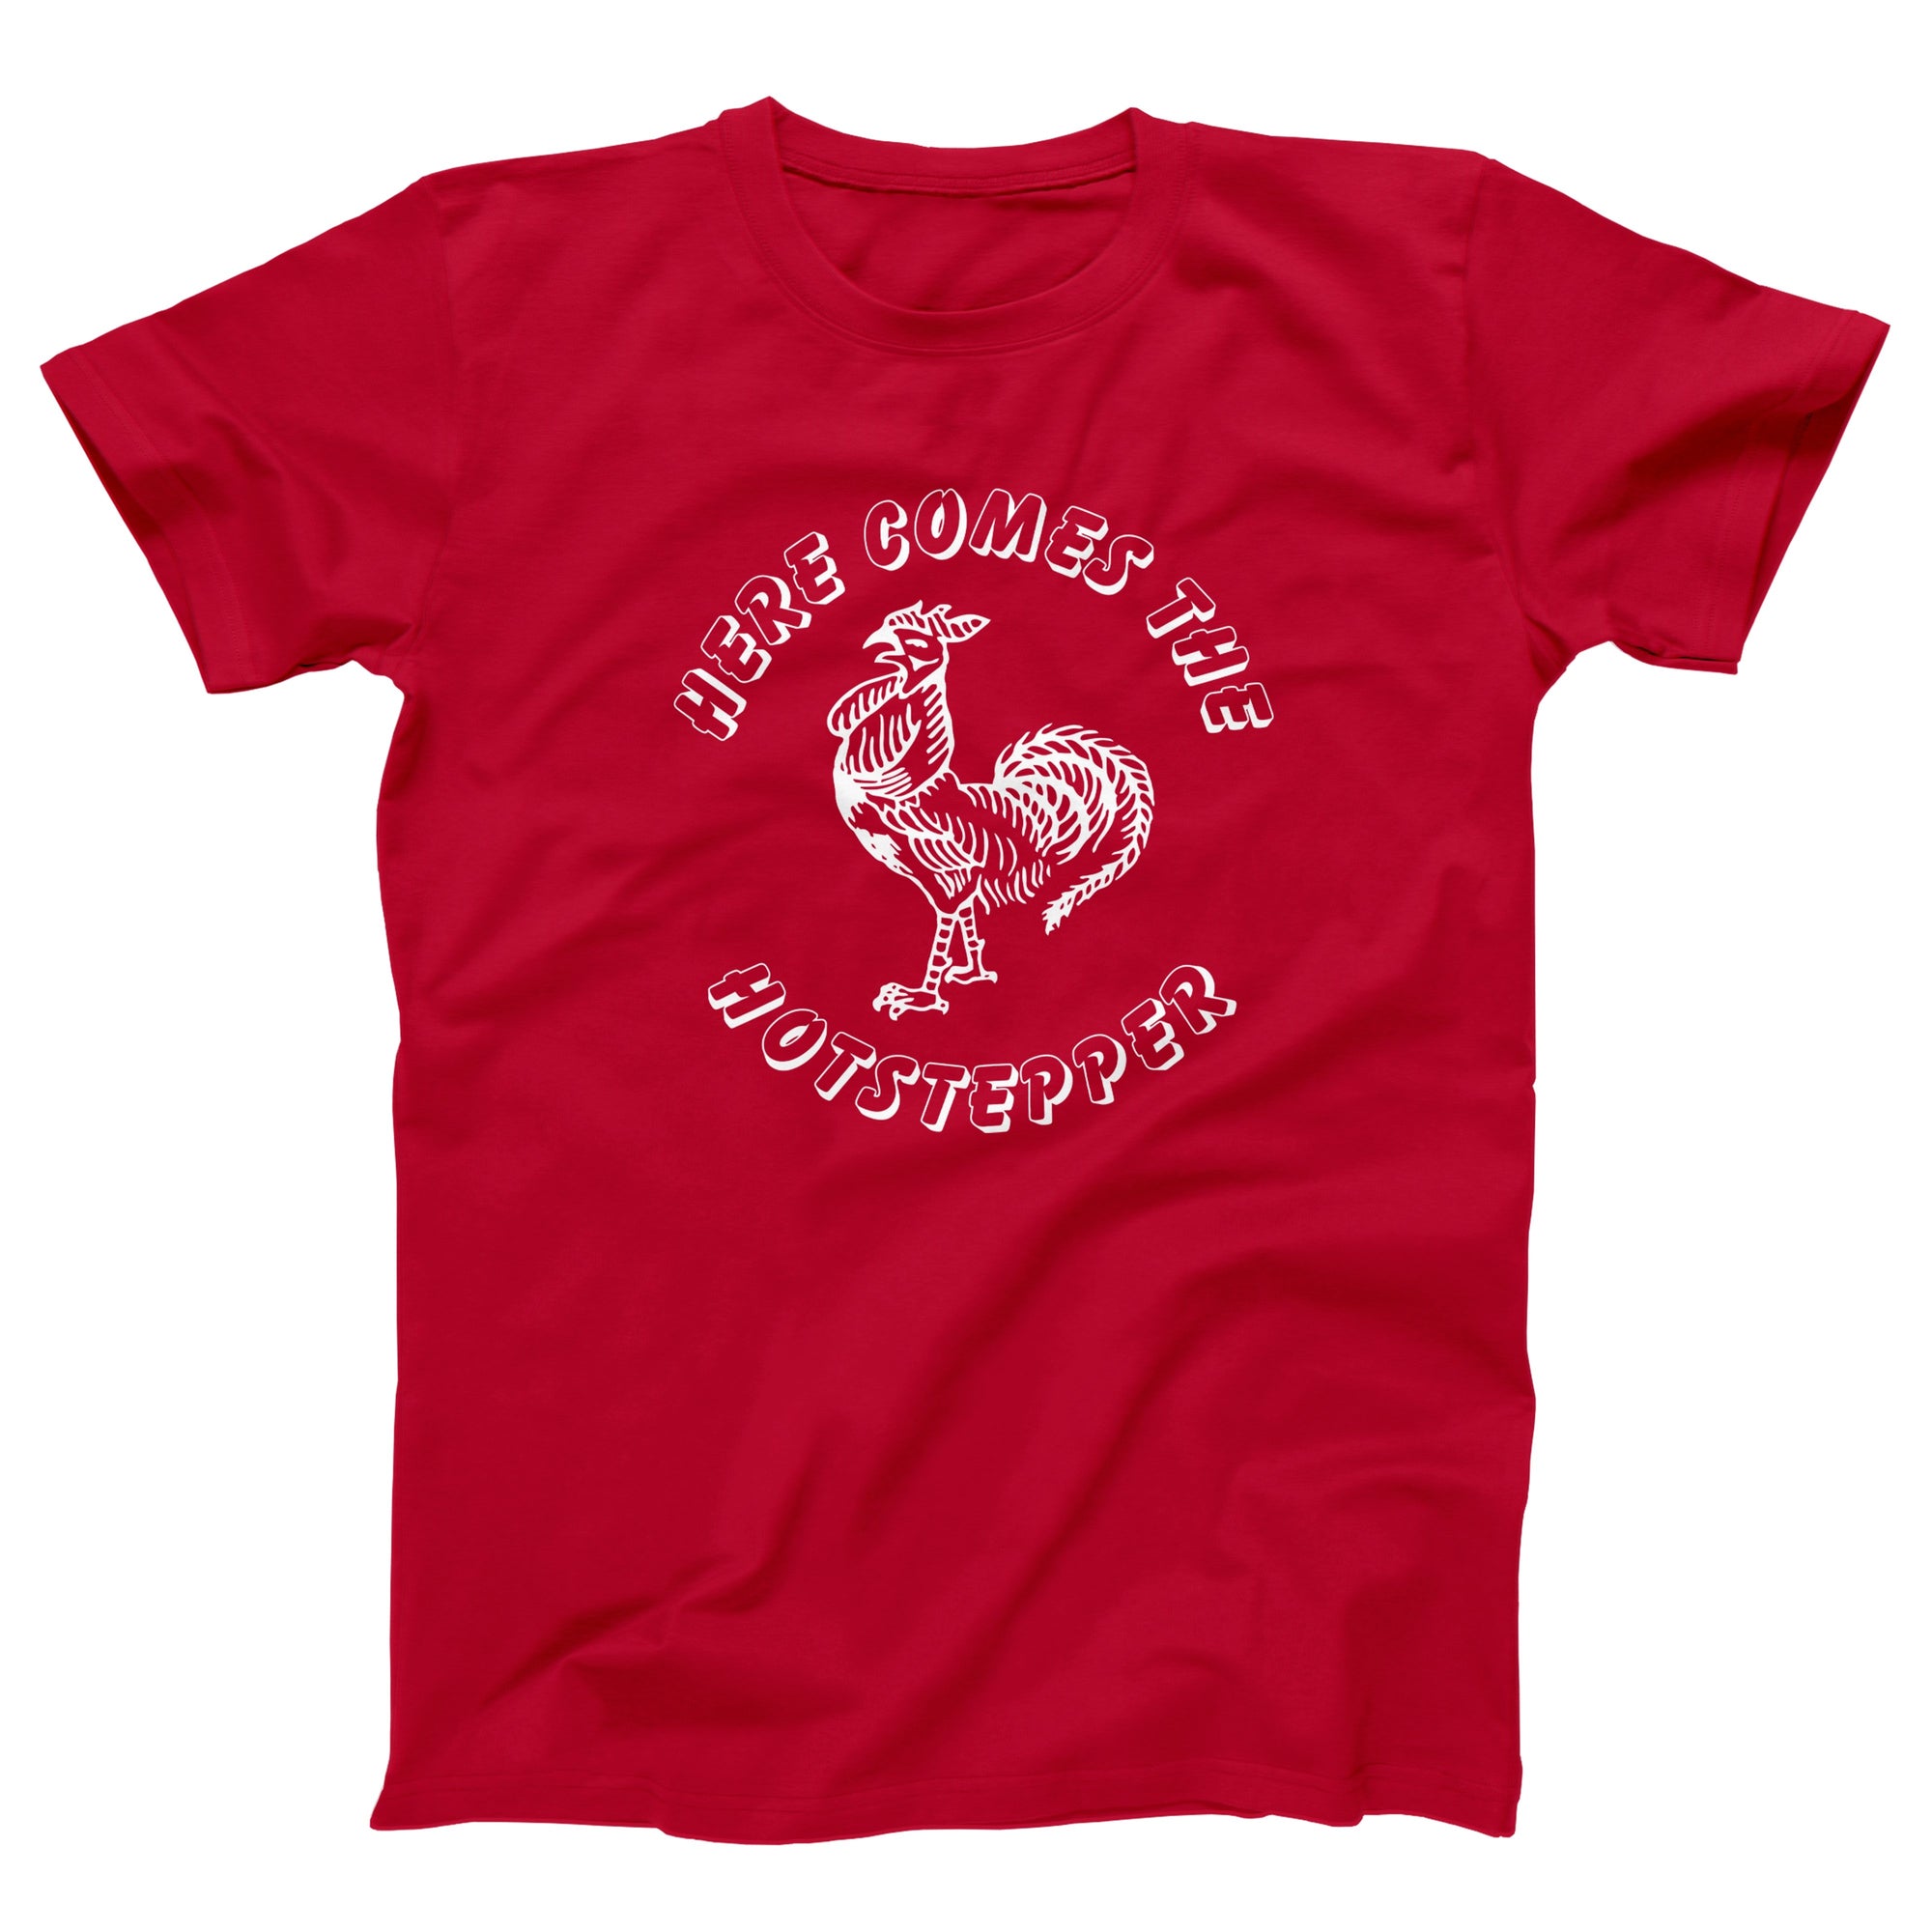 Here Comes The Hotstepper Adult Unisex T-Shirt - anishphilip